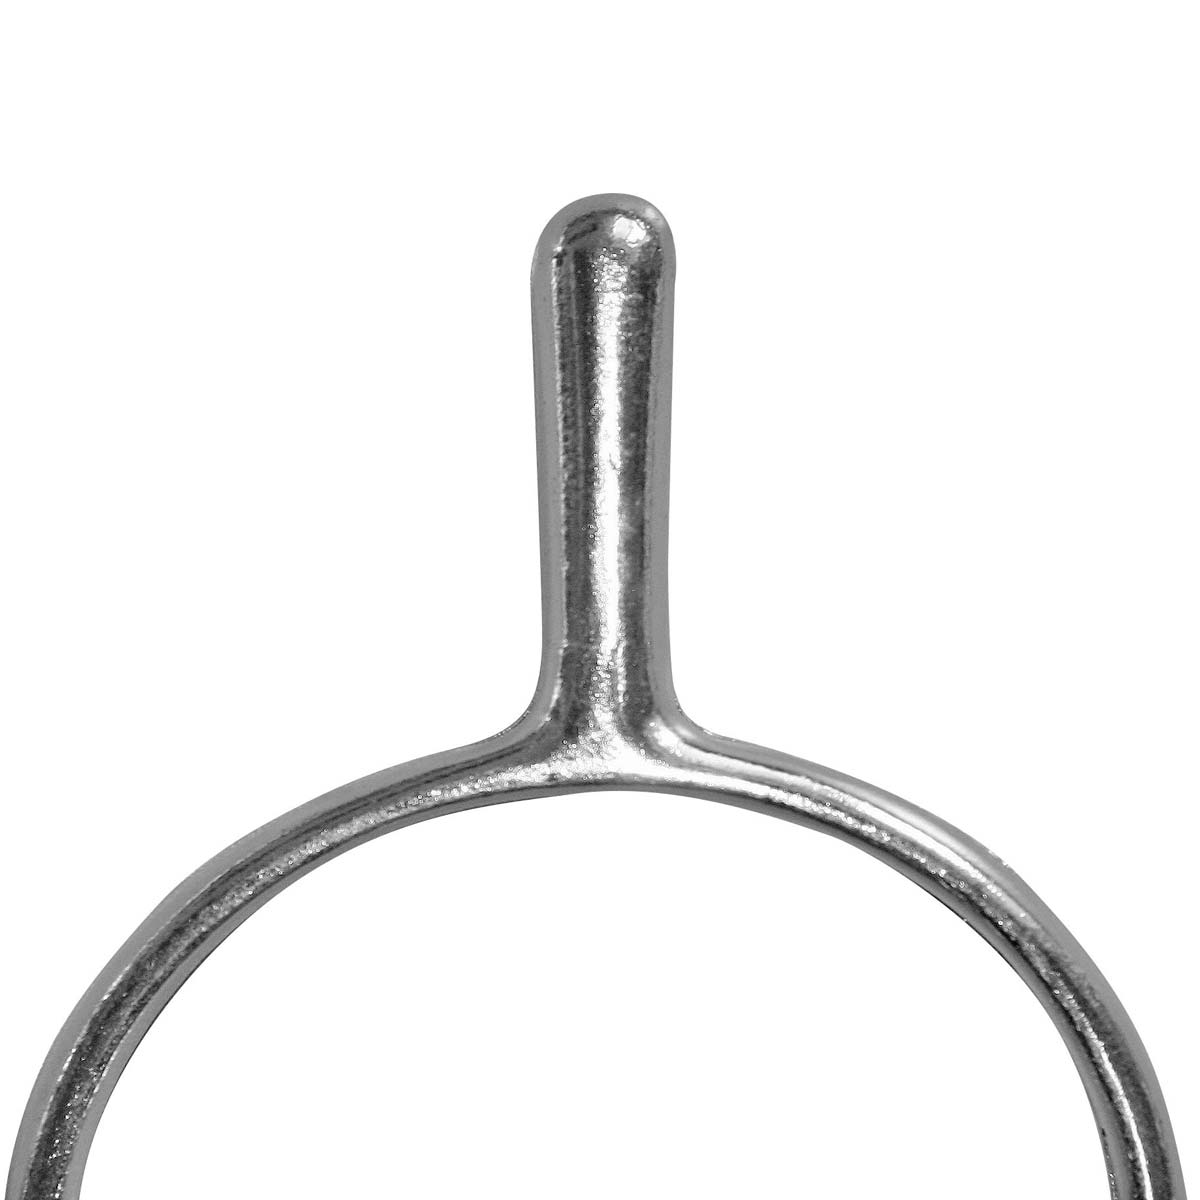 Covalliero spurs ball with straps for men 15 mm